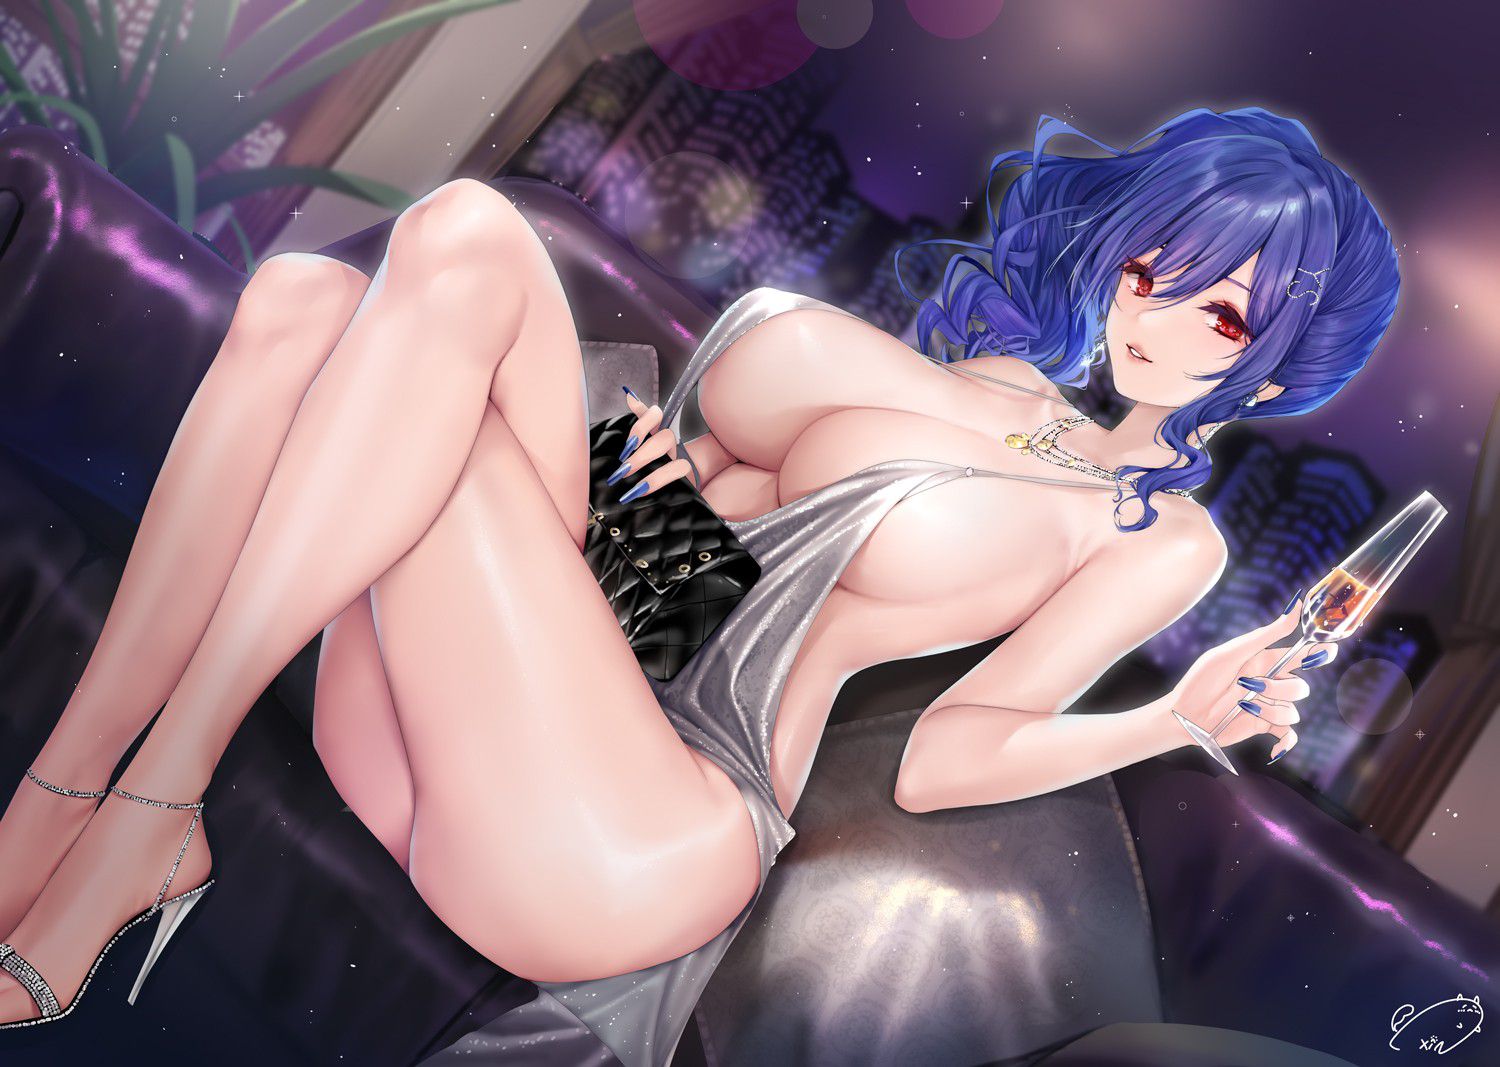 Two-dimensional erotic image of St. Louis of Azur Lane who wants to call it St. Louis unintentionally 7